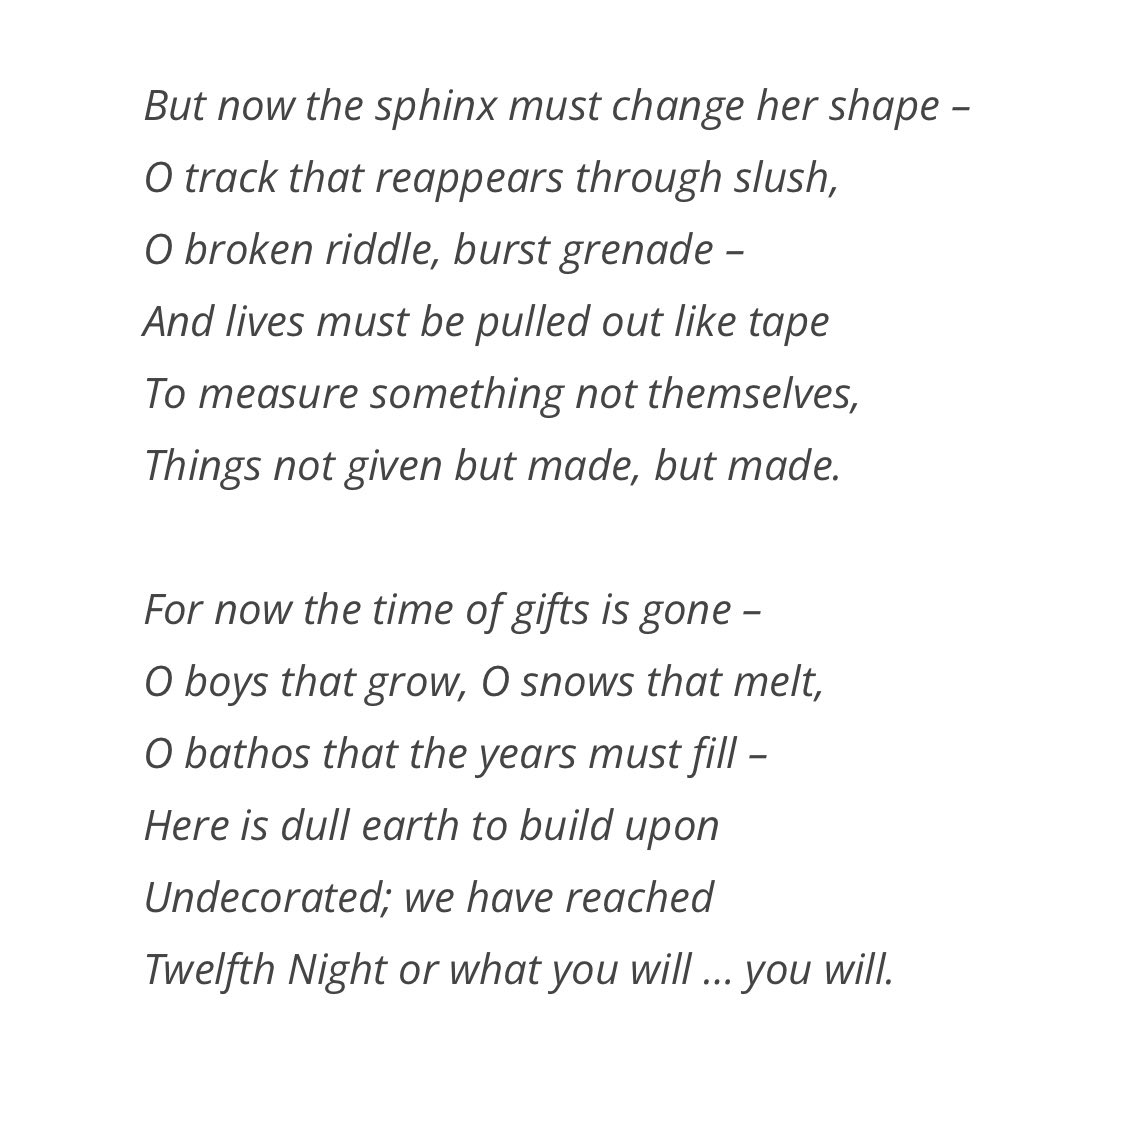 This is a few days early, but here’s ‘Twelfth Night’ by Louis MacNeice, written not long after the end of WW2.